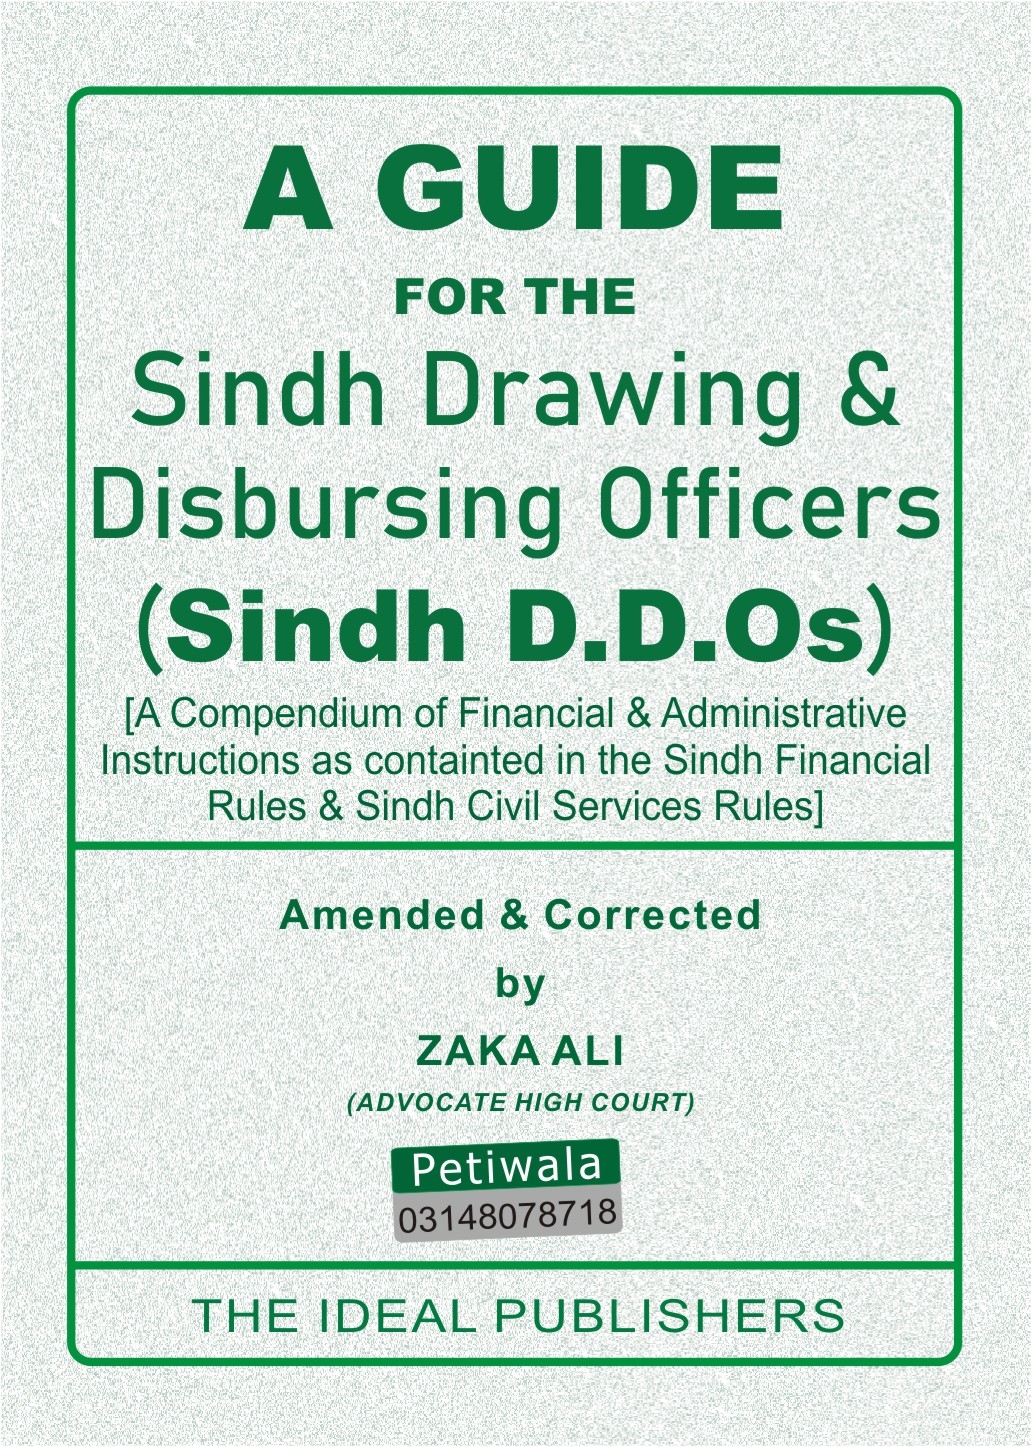 A Guide for the Sindh Drawing & Disbursing Officers